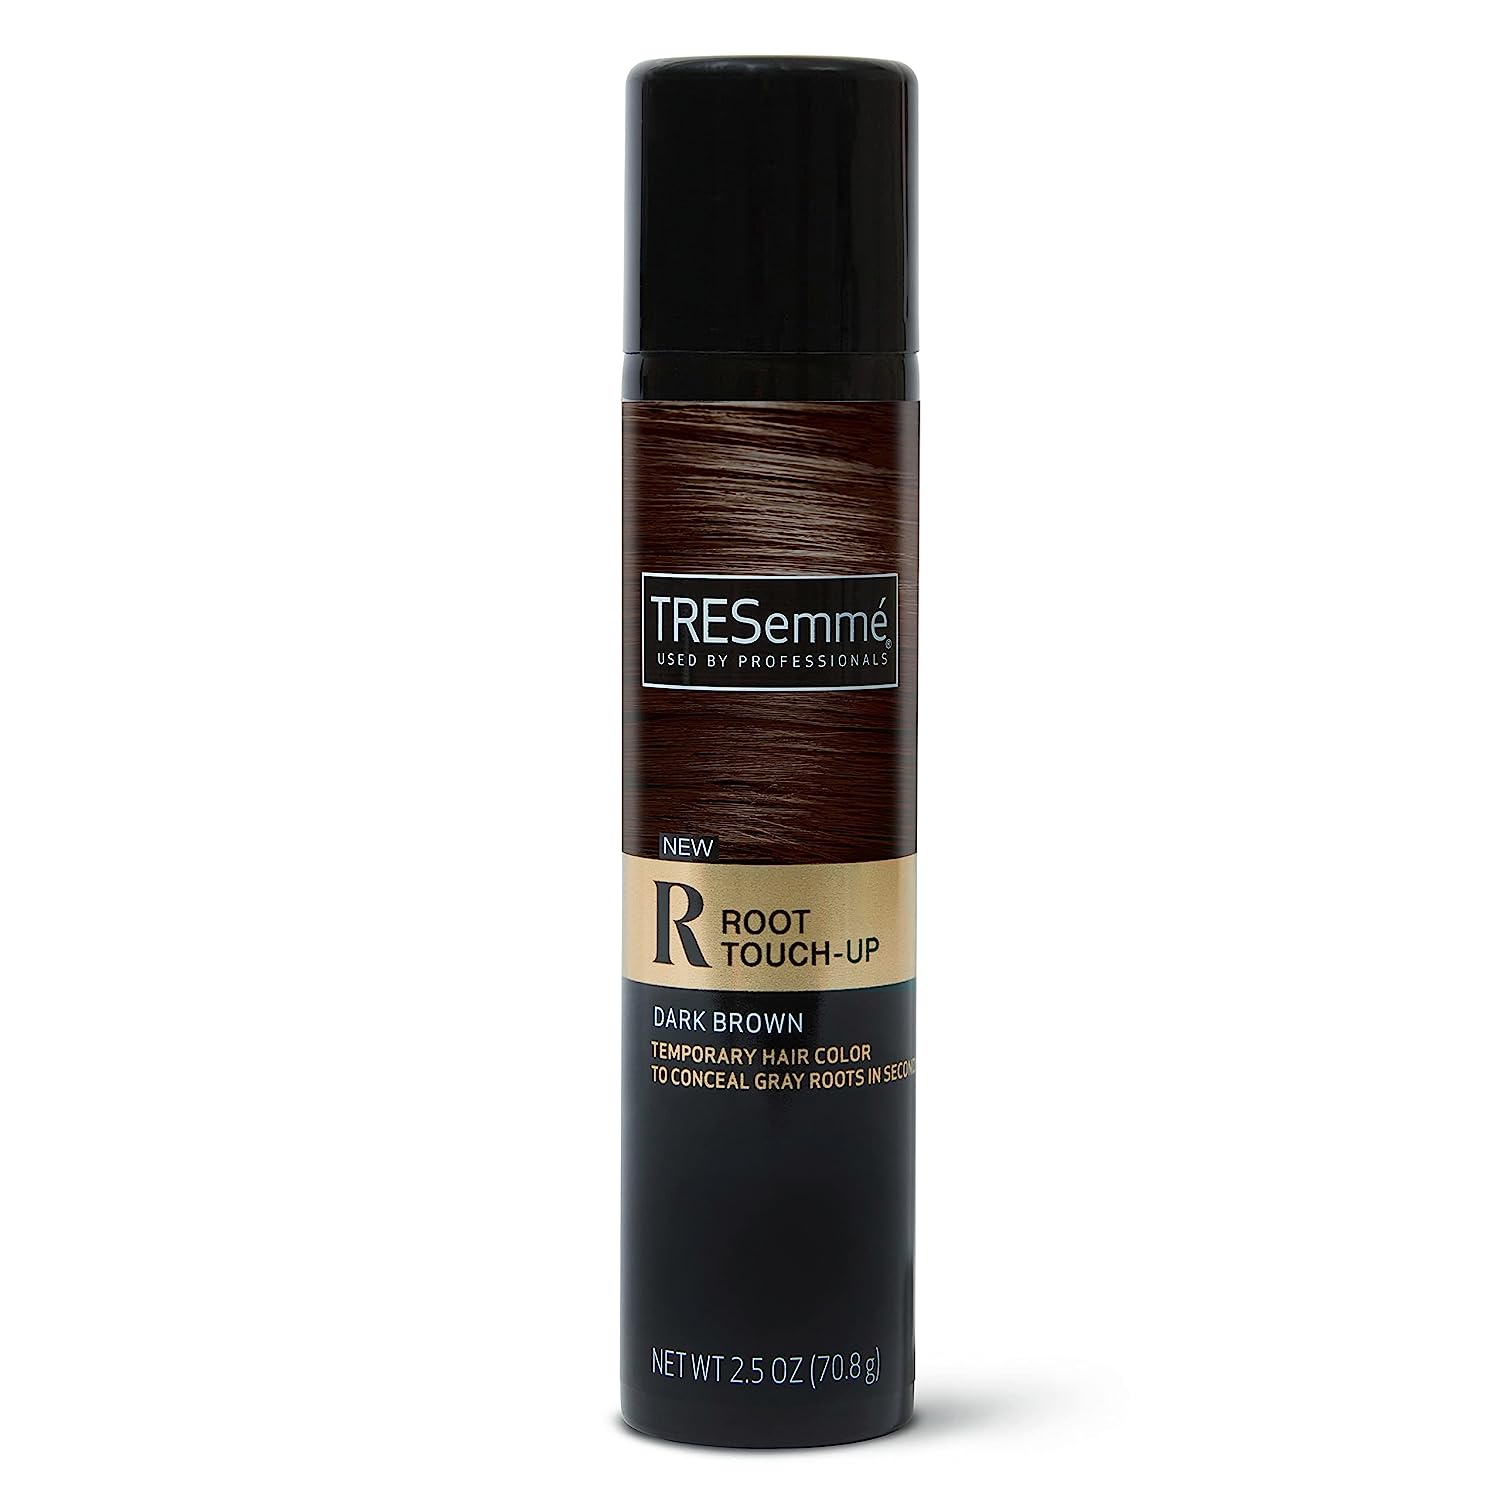 TRESemmé Root Touch-Up Temporary Hair Color Dark Brown [...]